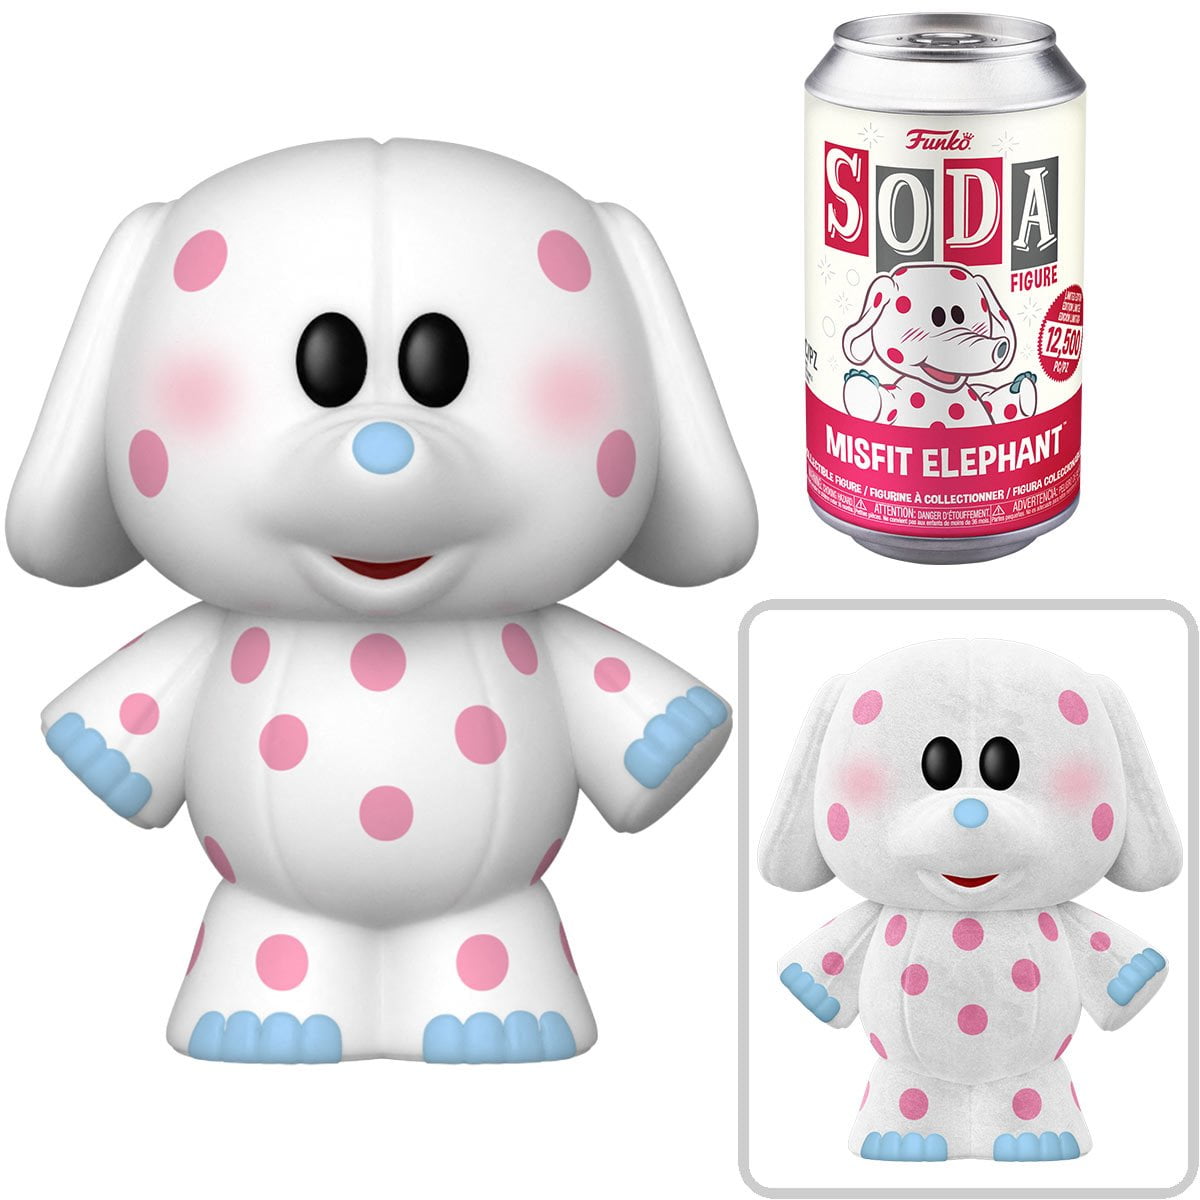 Funko Vinyl Soda Rudolph: Misfit Elephant Limited Edition Figure with  Chance of Chase